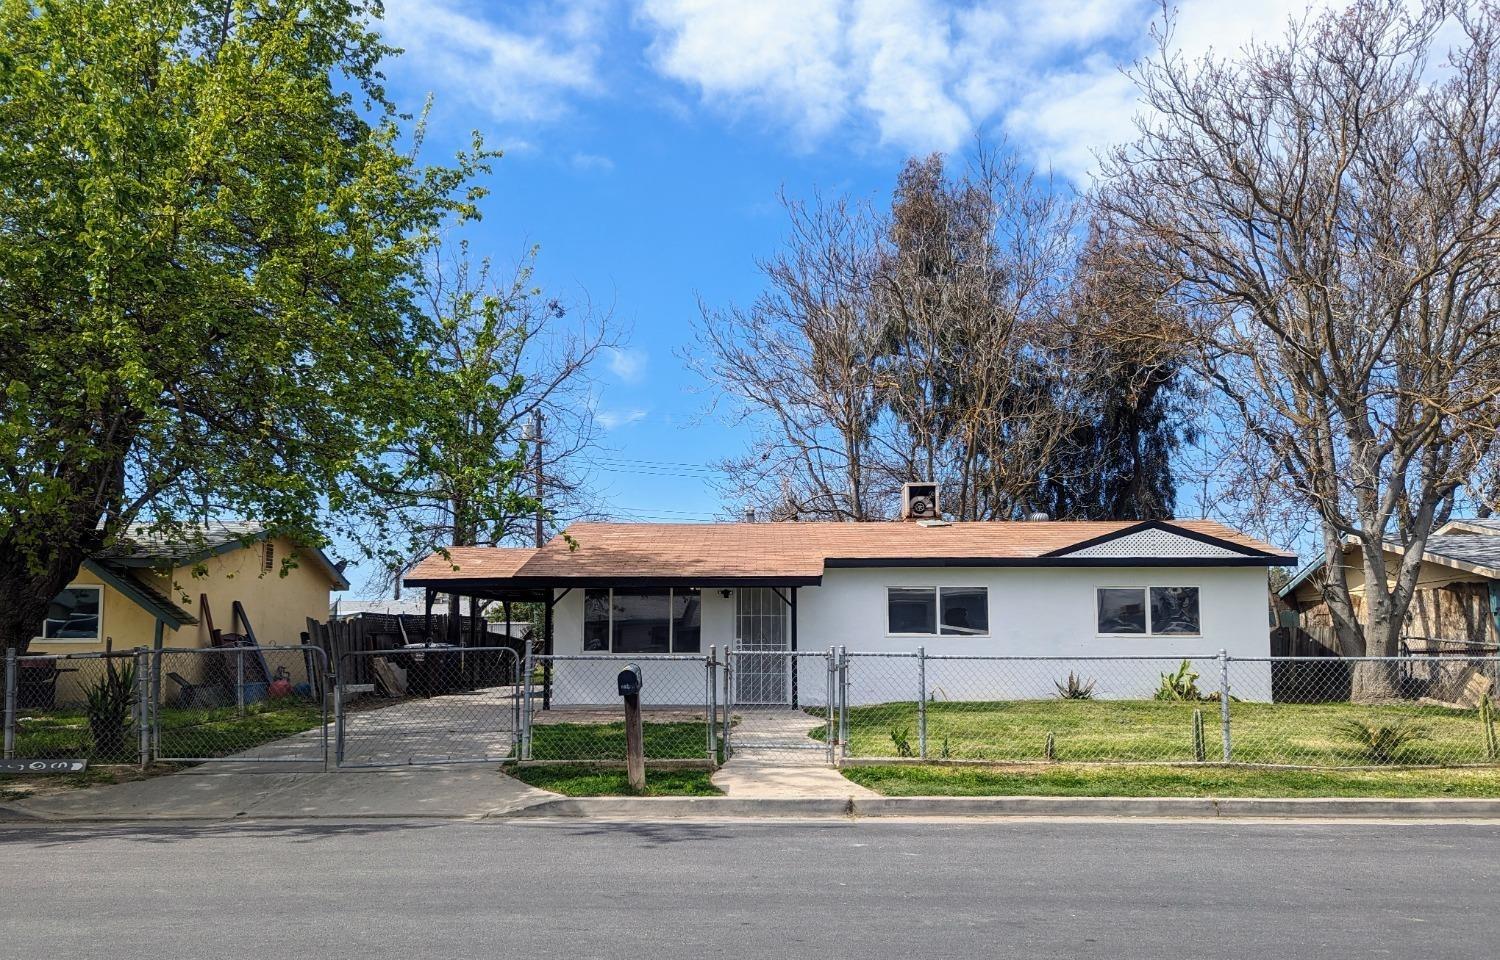 Photo of 11654 Shaw Pl in Hanford, CA